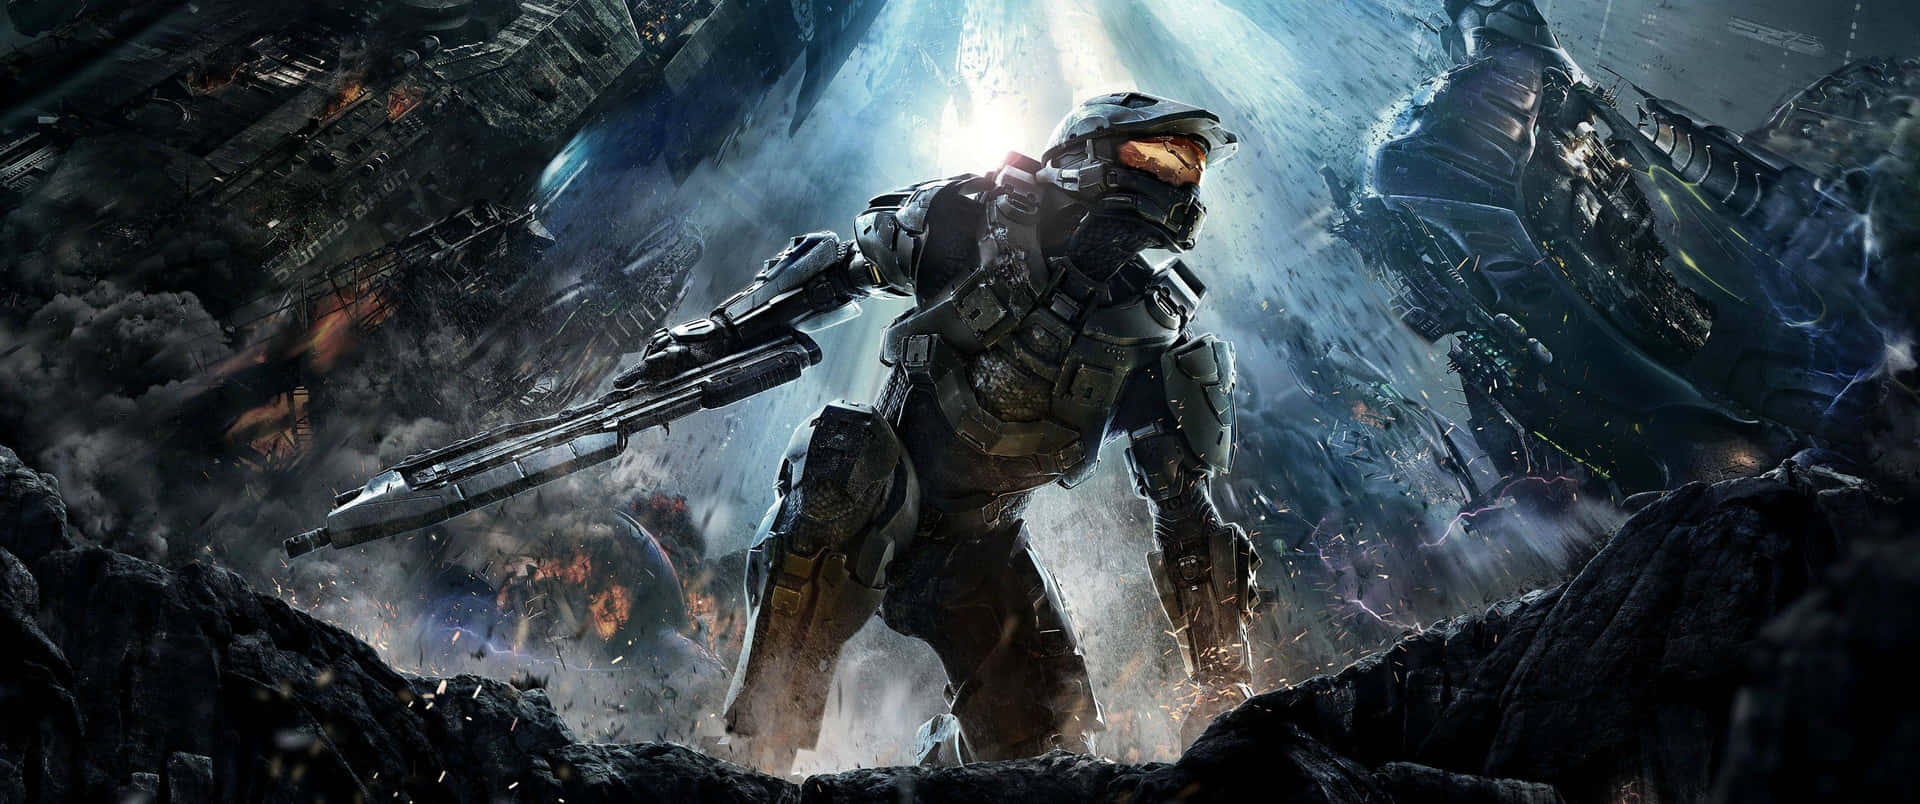 3440x1440 Game Halo 4 Background